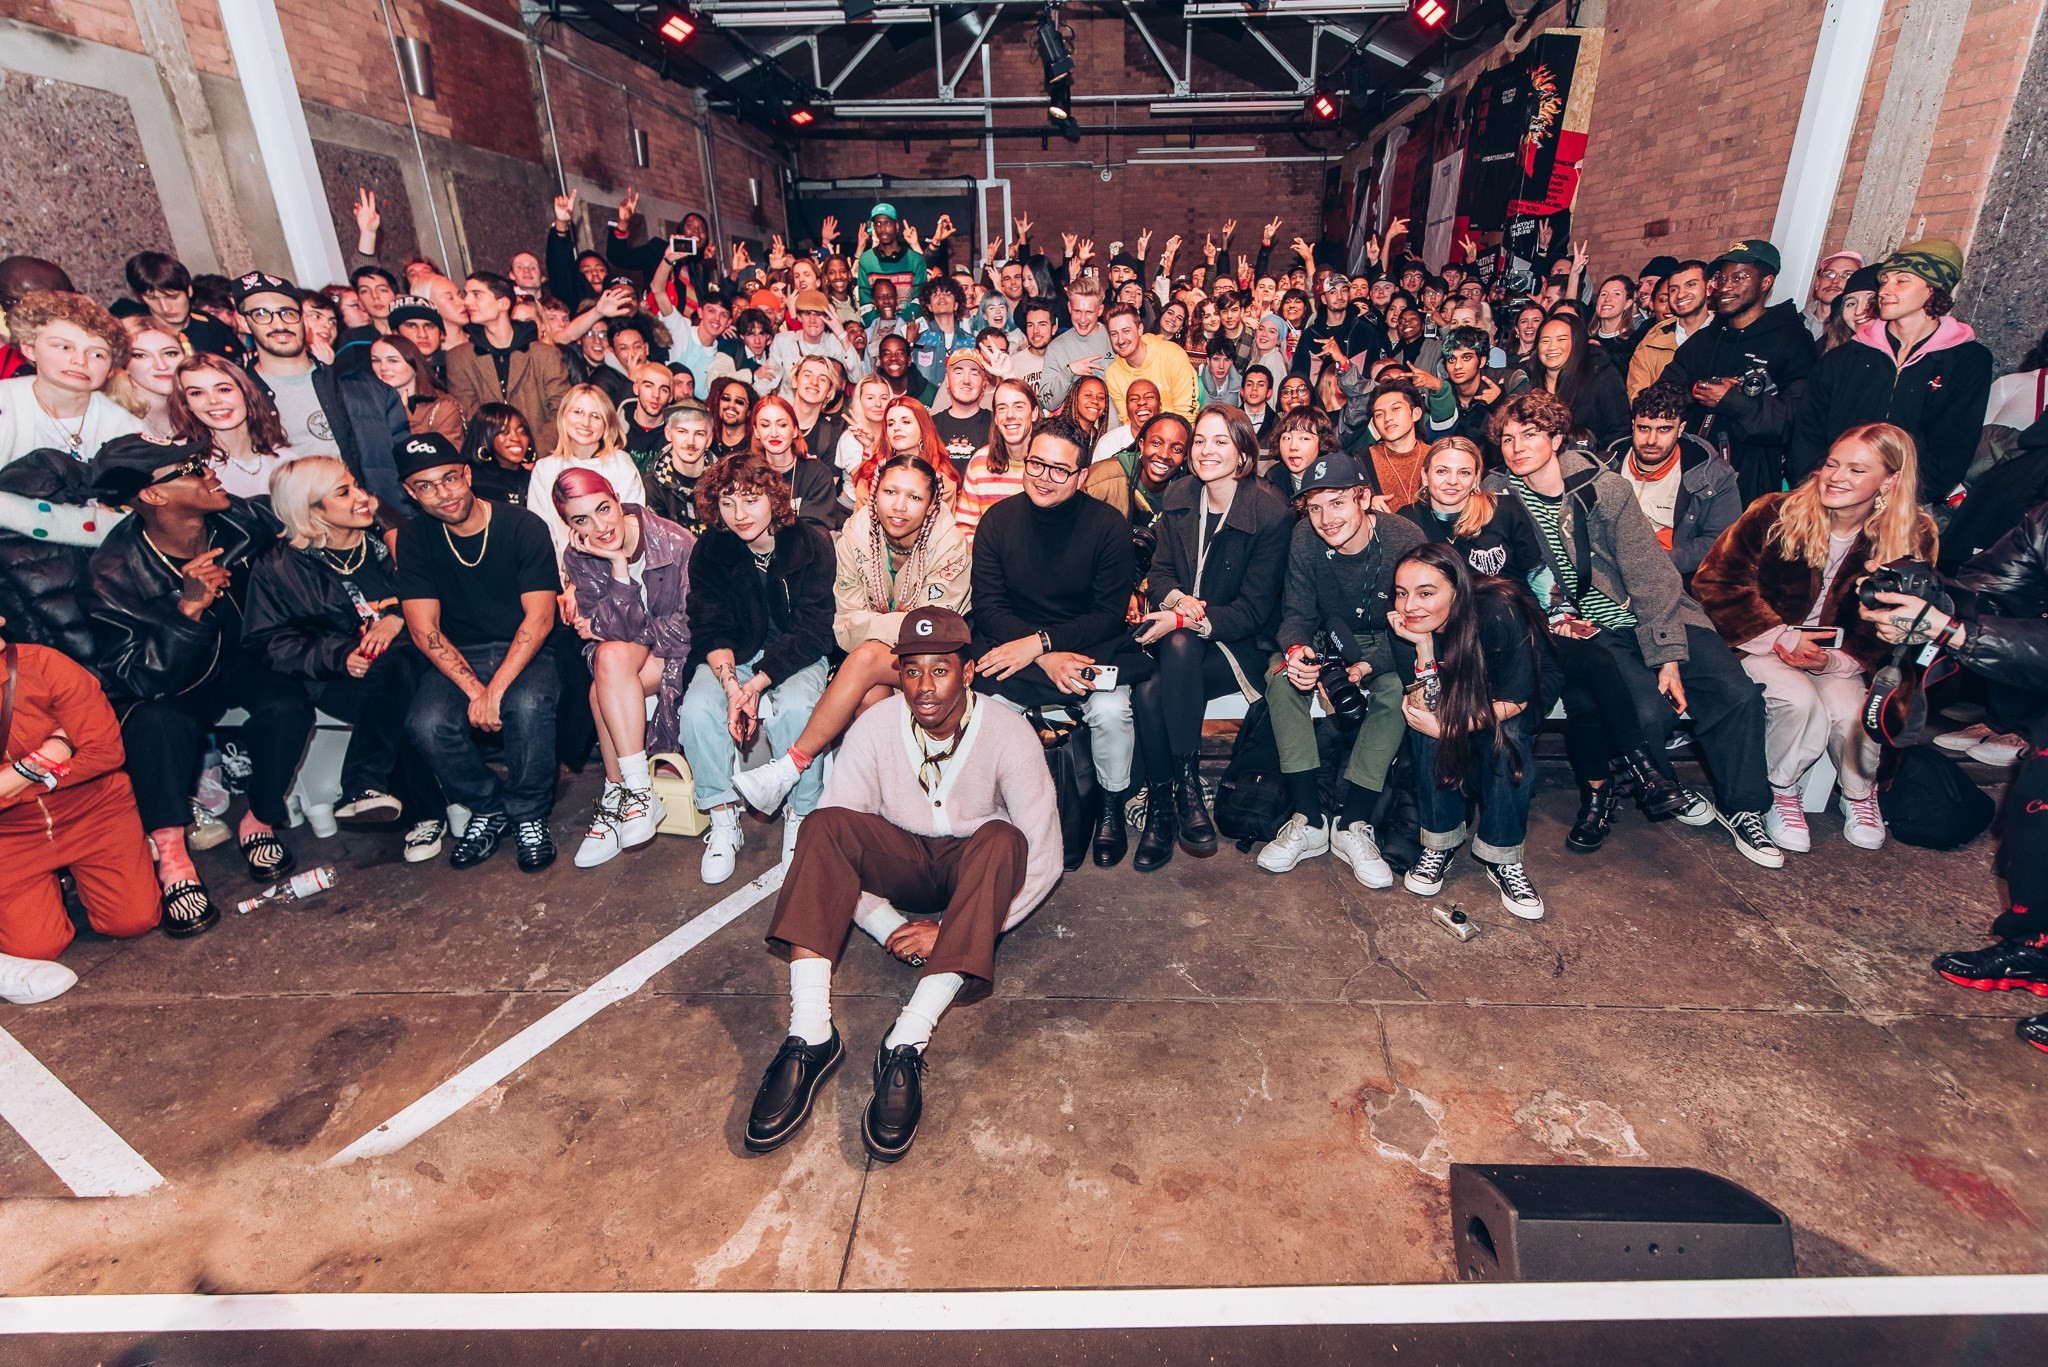 Perennial forkæle Hotellet Tyler, the Creator and Octavian headlined Converse's LFW event | Dazed